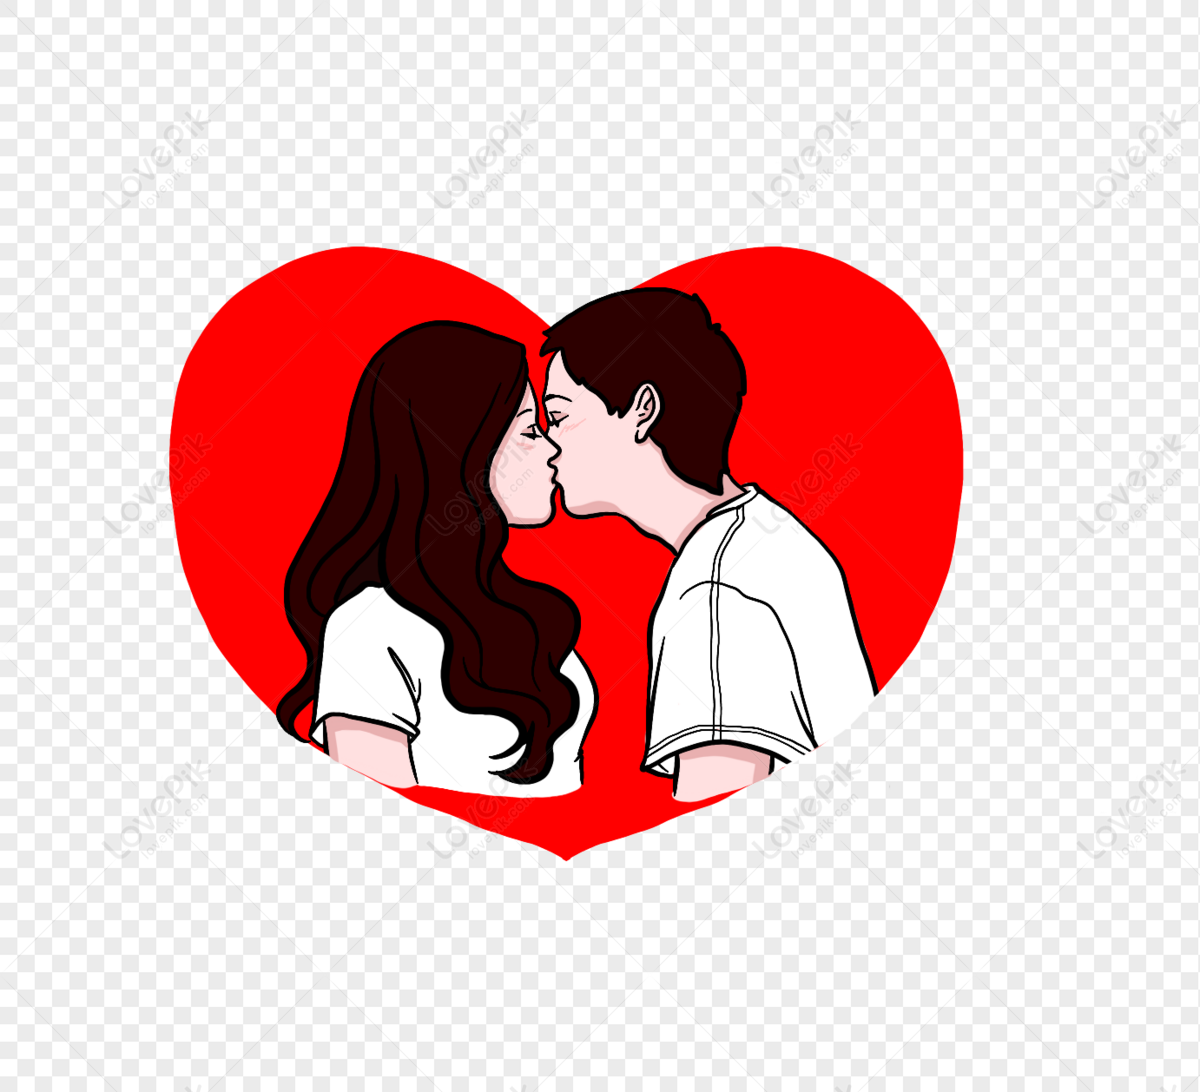 Cartoon Hand Drawn Romantic Valentine Couple Sweet Kiss Free PNG And  Clipart Image For Free Download - Lovepik | 401276619